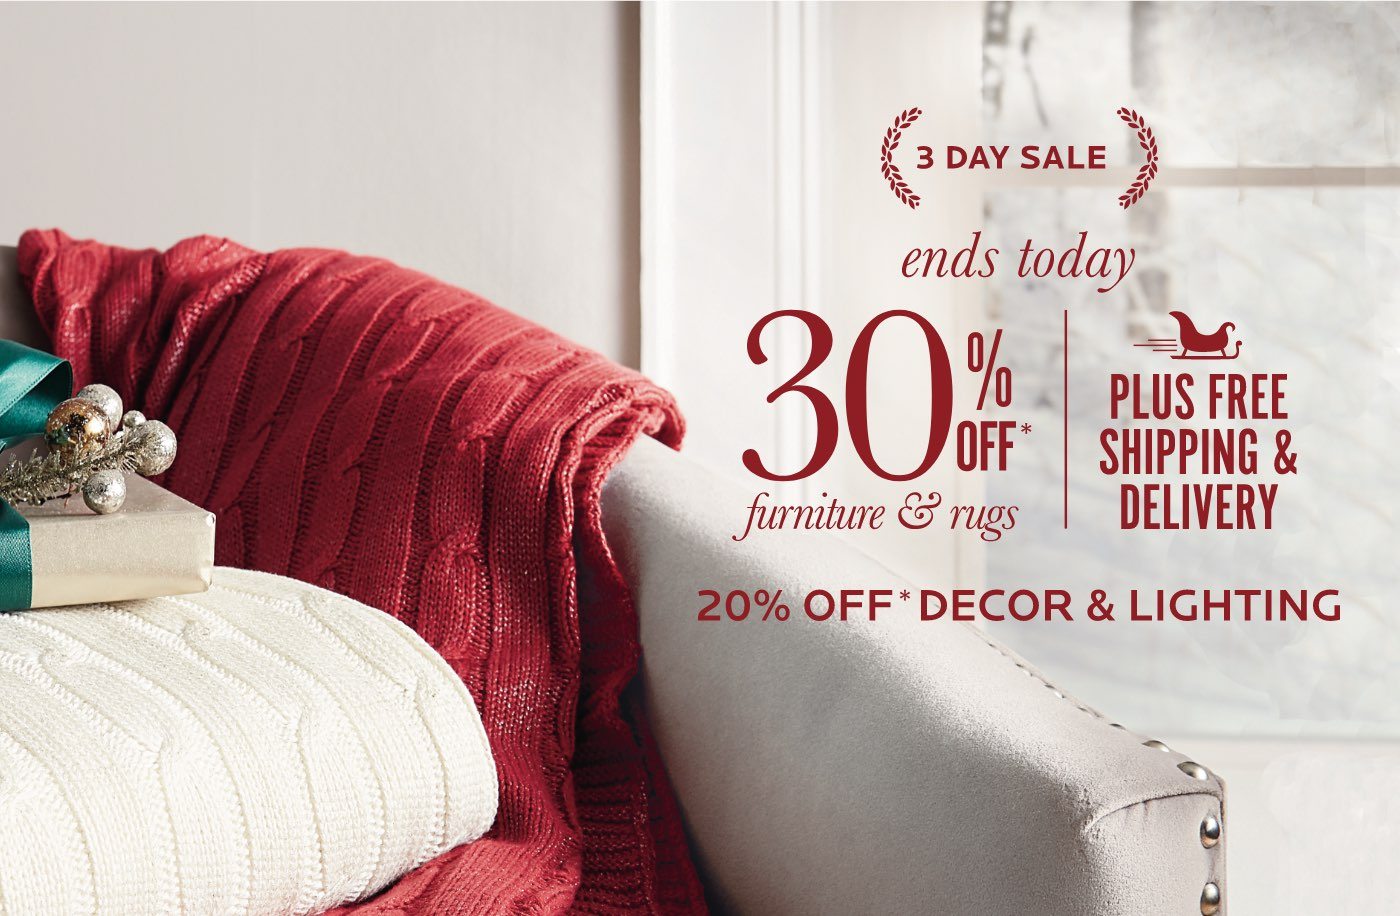 3 Day Sale - Starts Friday. 30% Off Furniture & Rugs Plus Free Shipping & Delivery